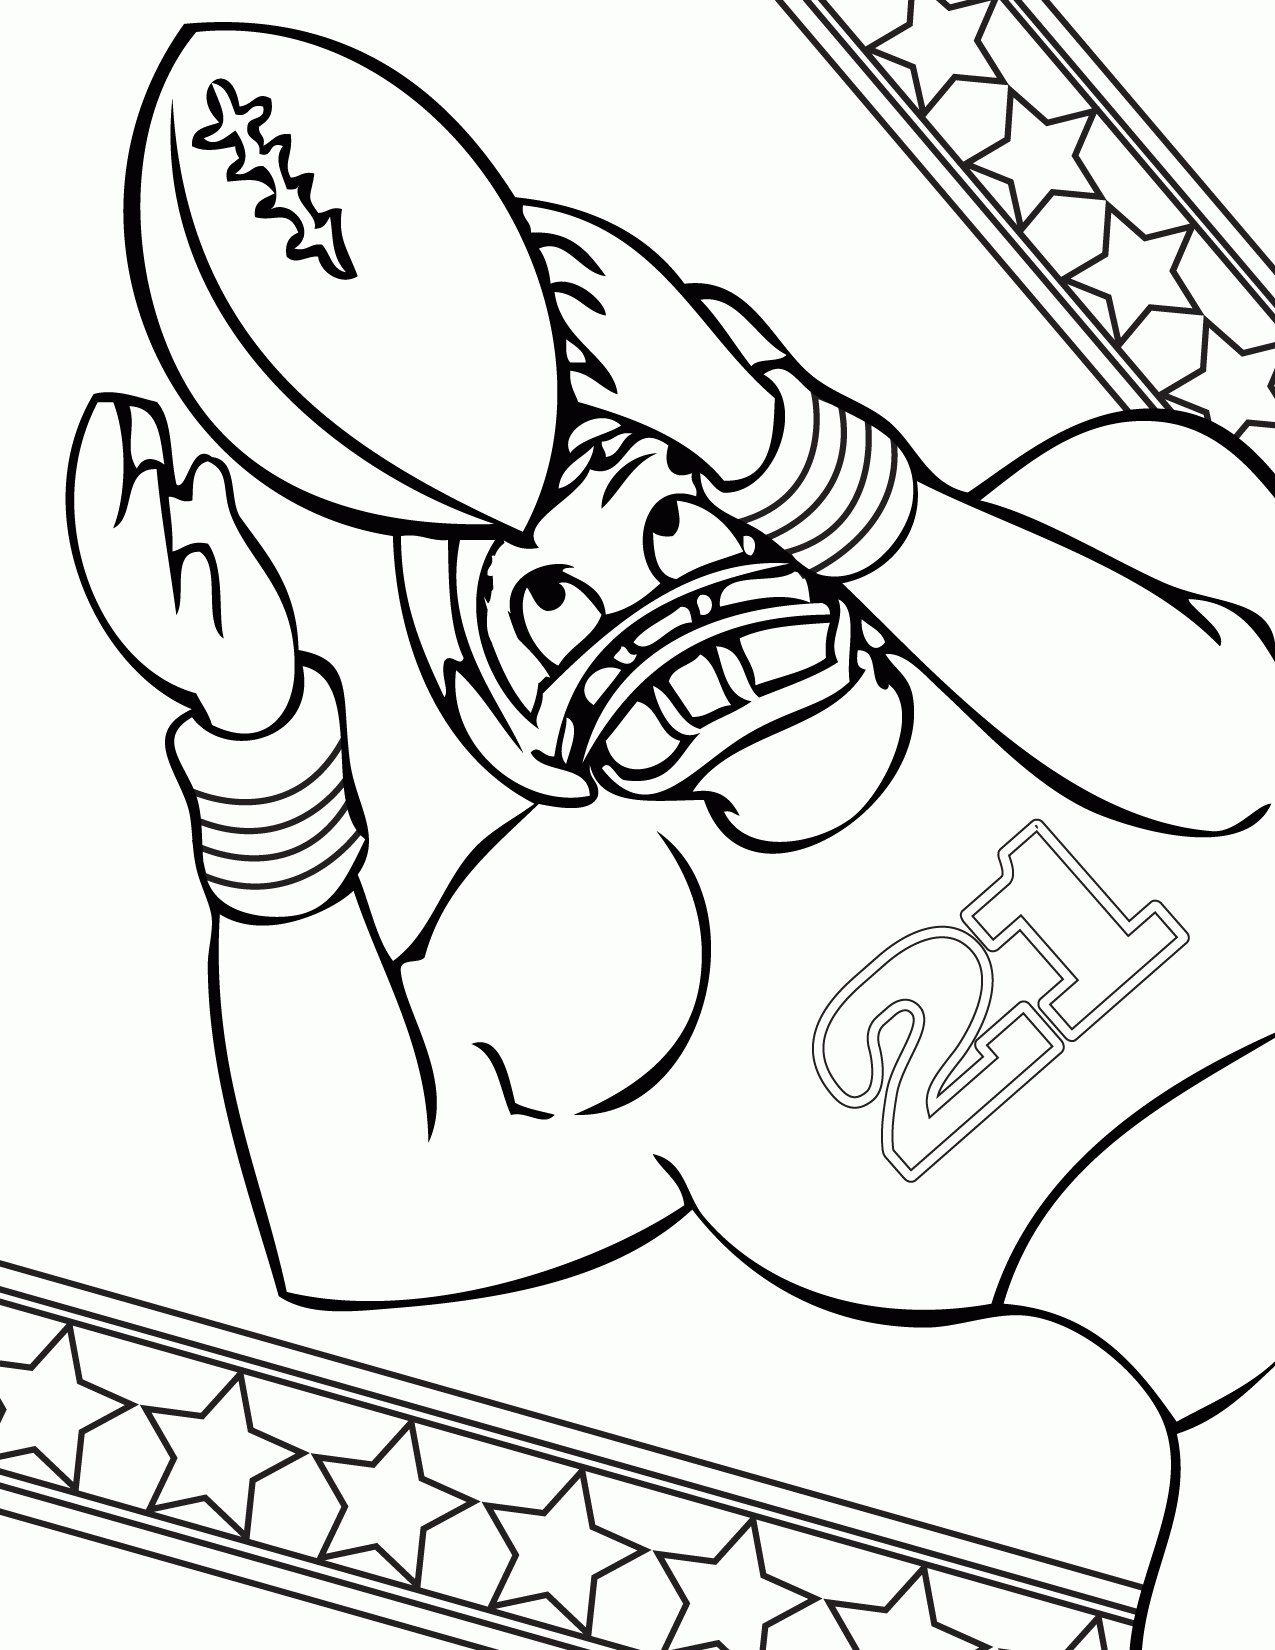 Fun Sports Coloring Page - Coloring Home